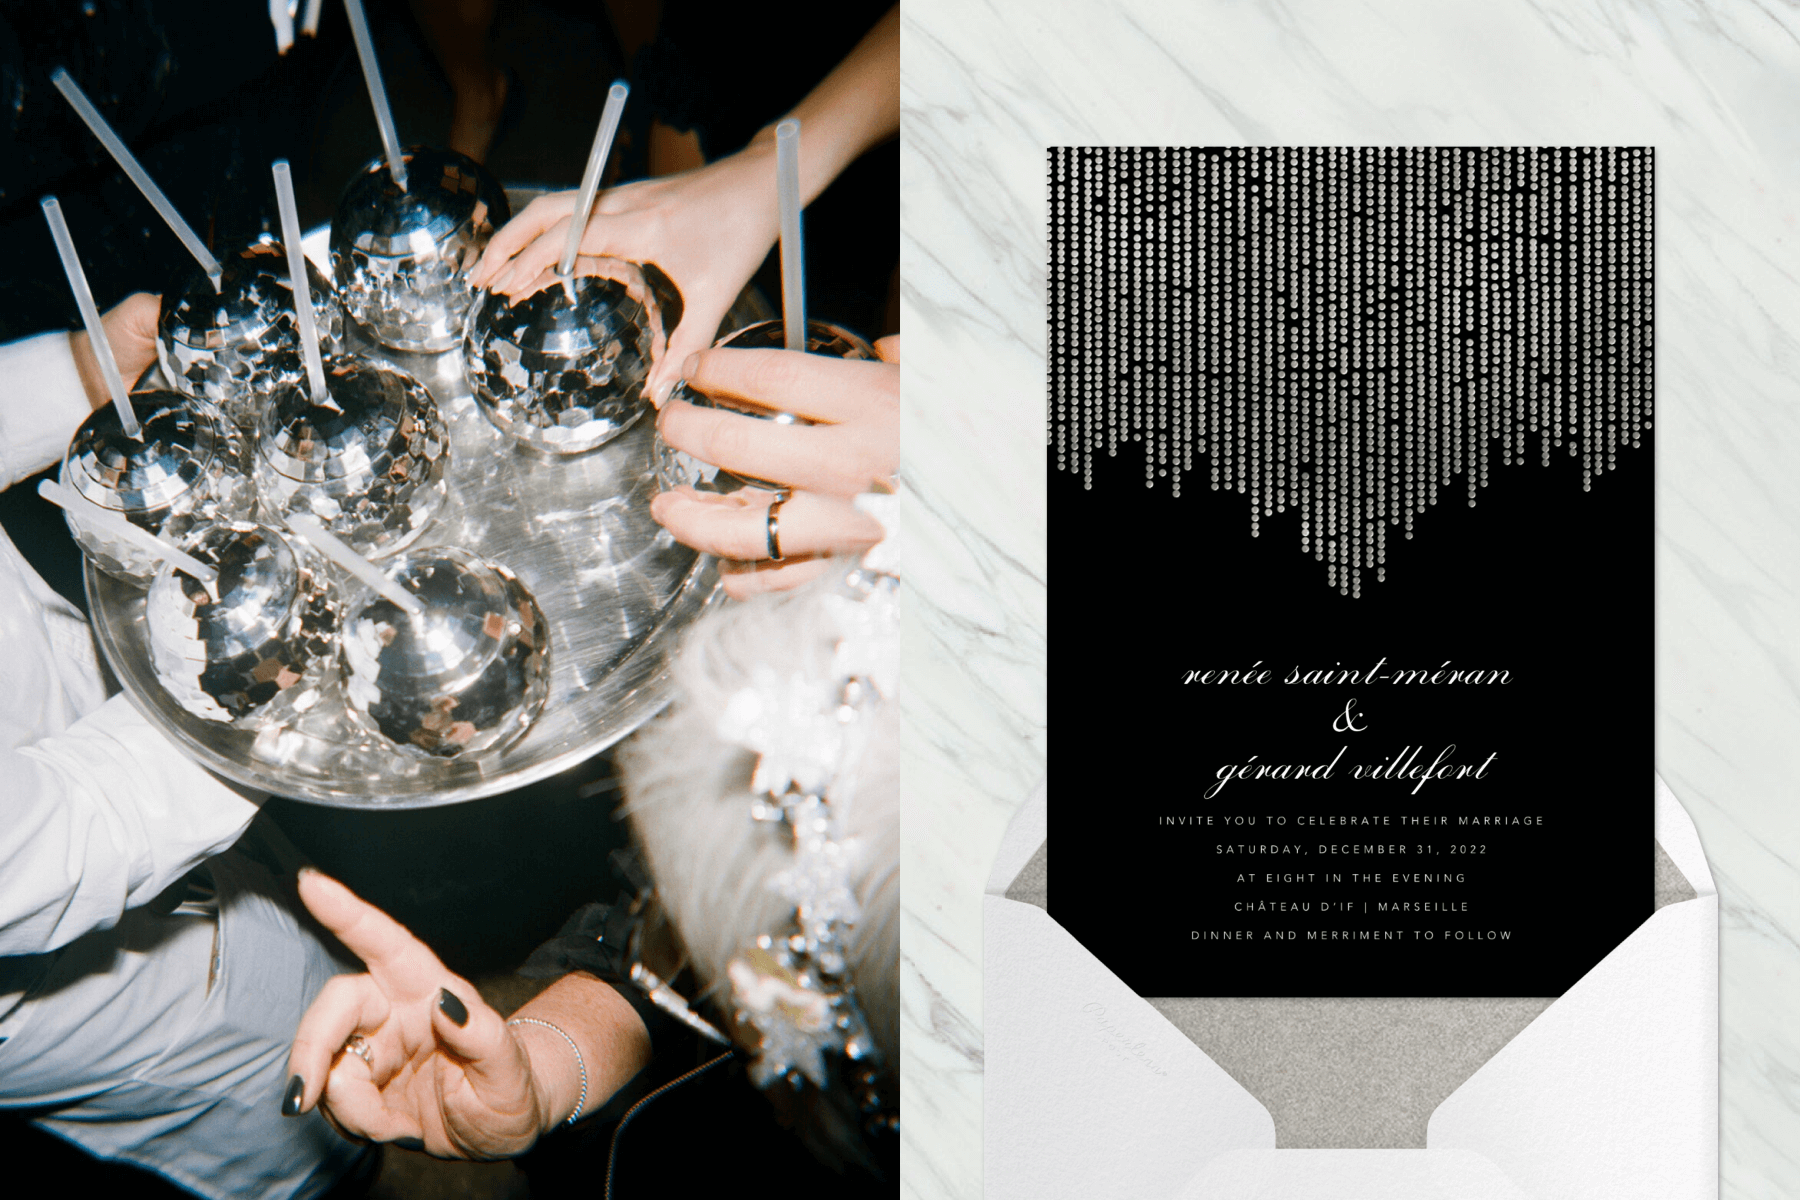 Left: A black invitation with silver beaded strings hanging from the top on a marble backdrop. Right: Hands reach for disco ball-shaped drinks with straws on a silver serving platter.